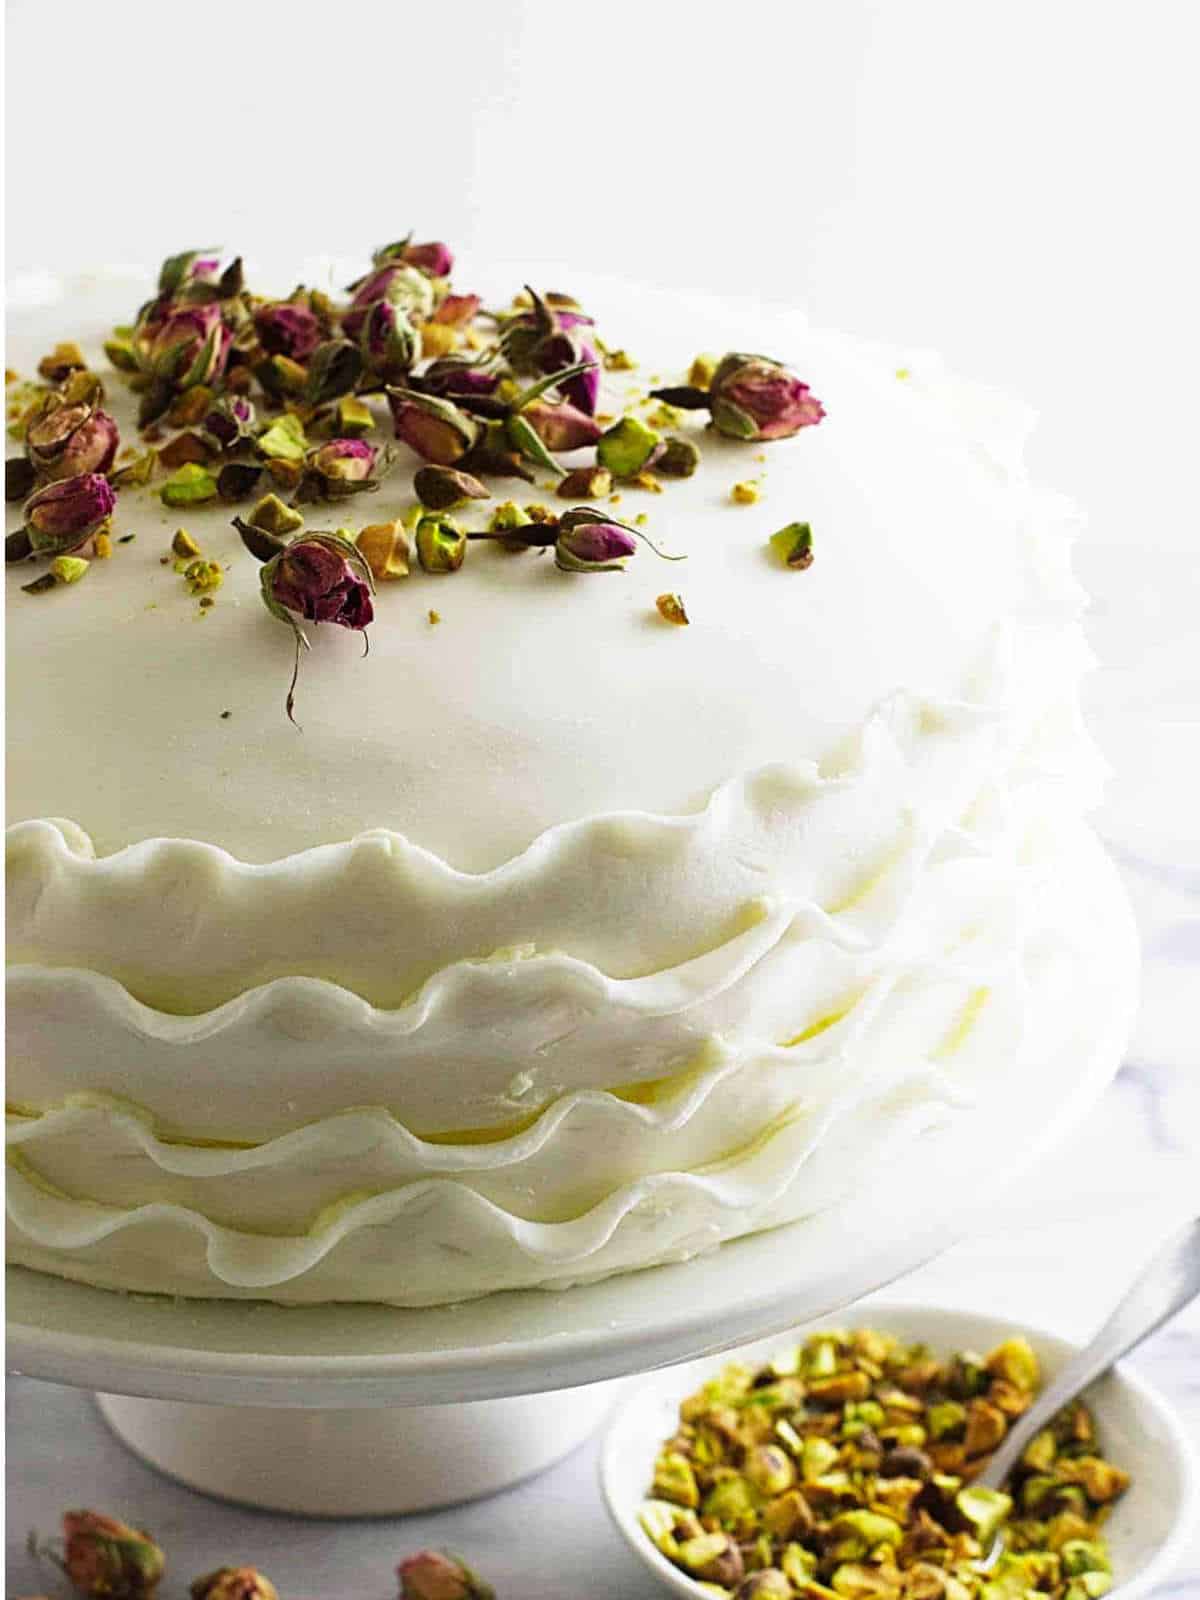 adding rose buds and pistachio nuts on top of a cake.